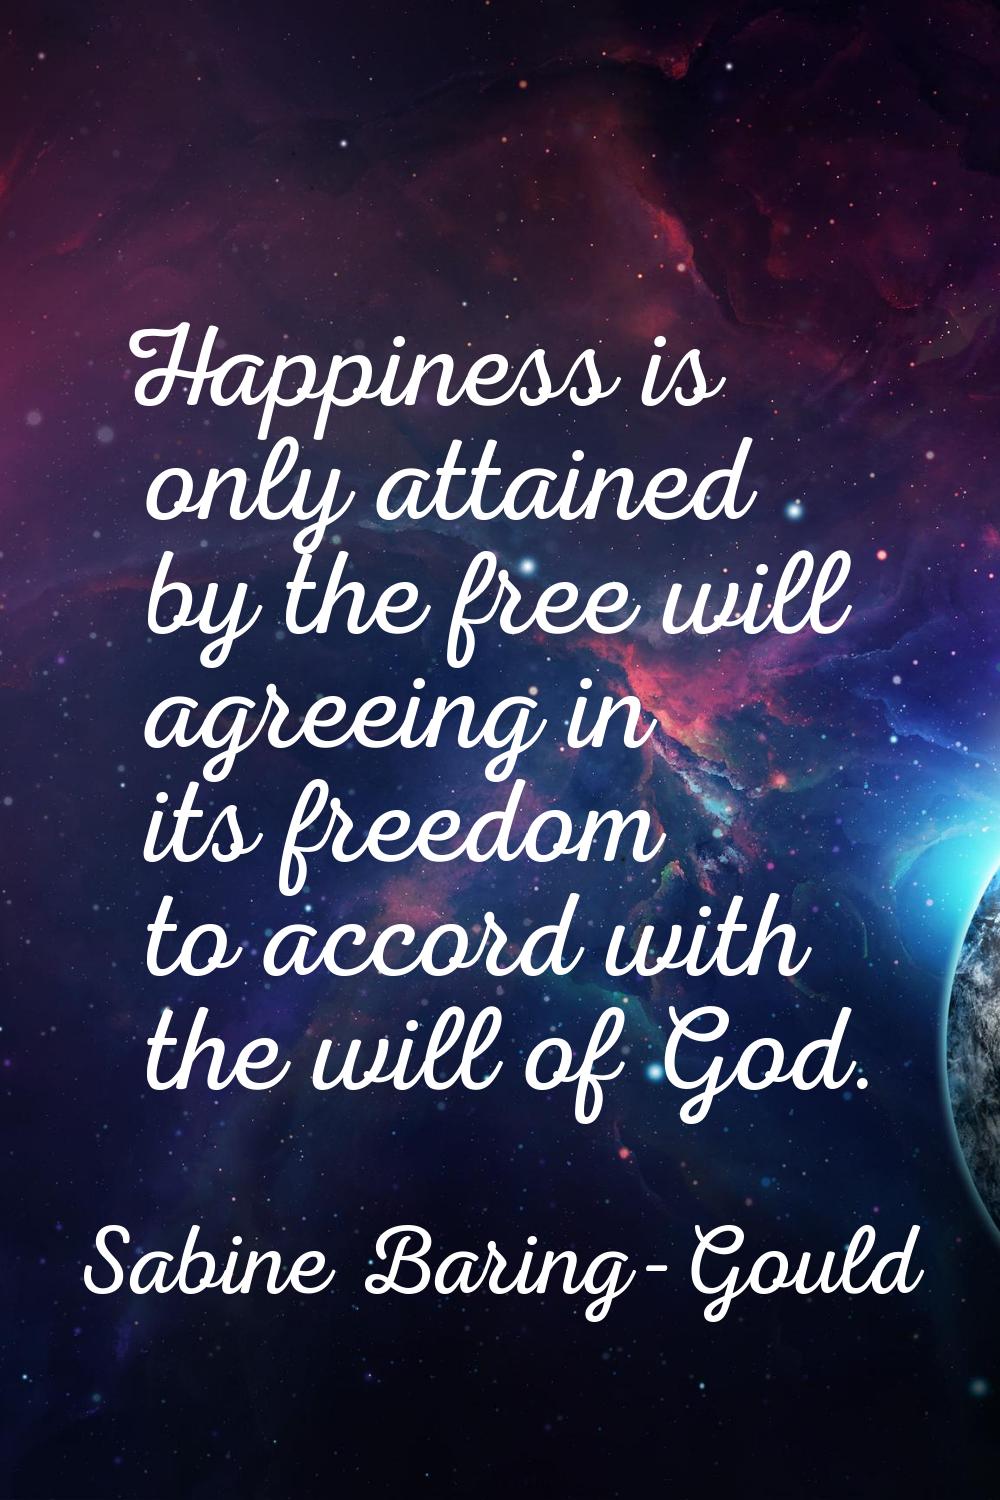 Happiness is only attained by the free will agreeing in its freedom to accord with the will of God.